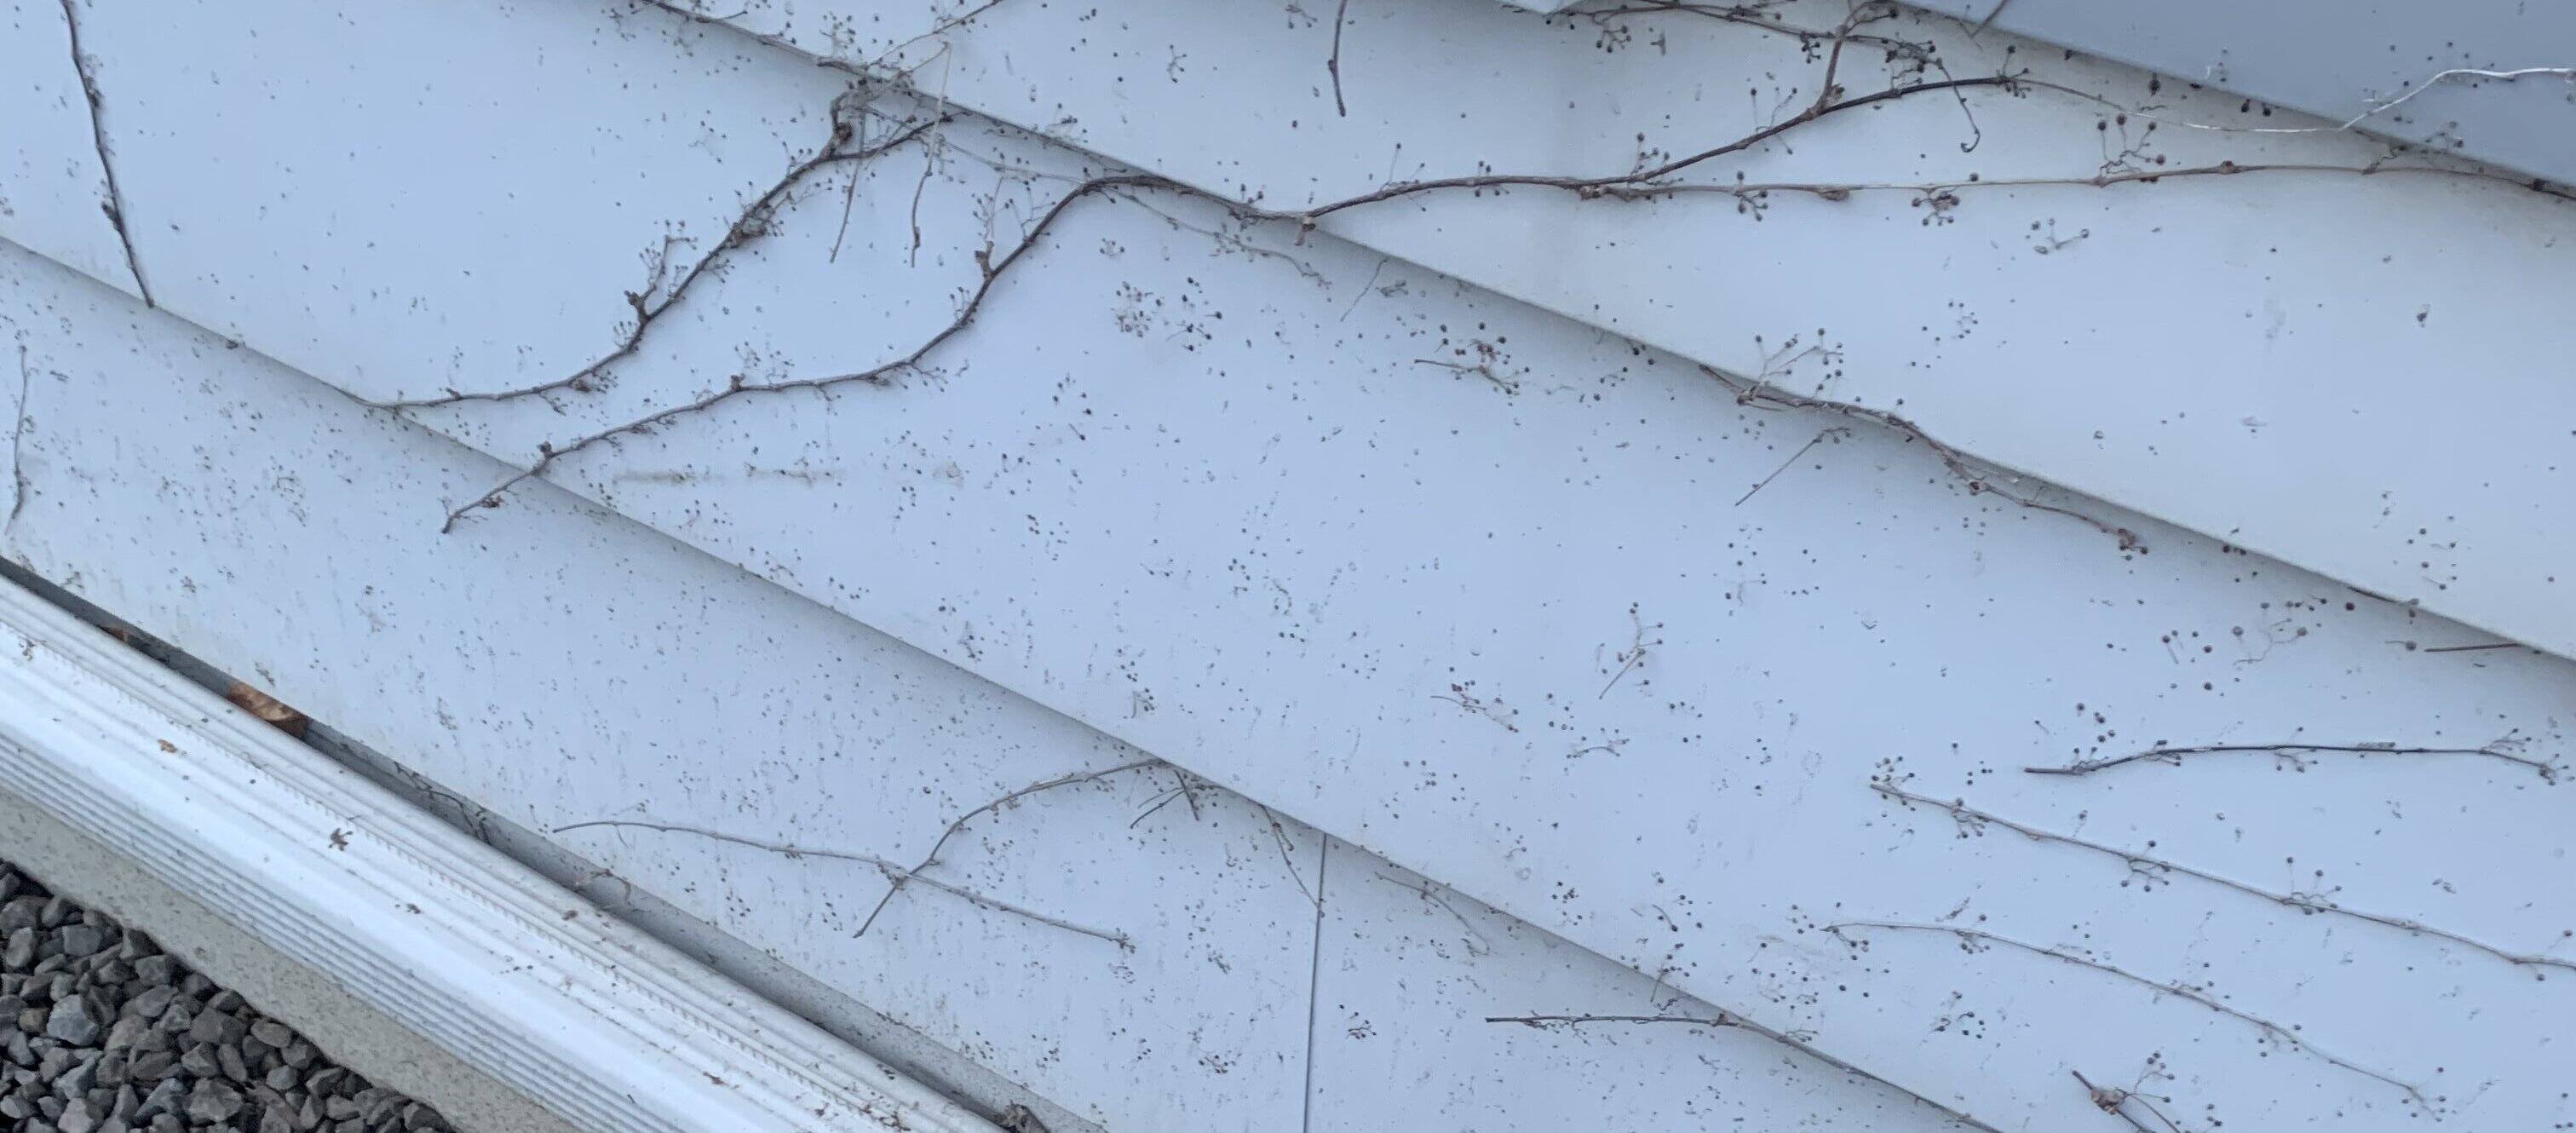 How To Remove Vine Marks From Siding